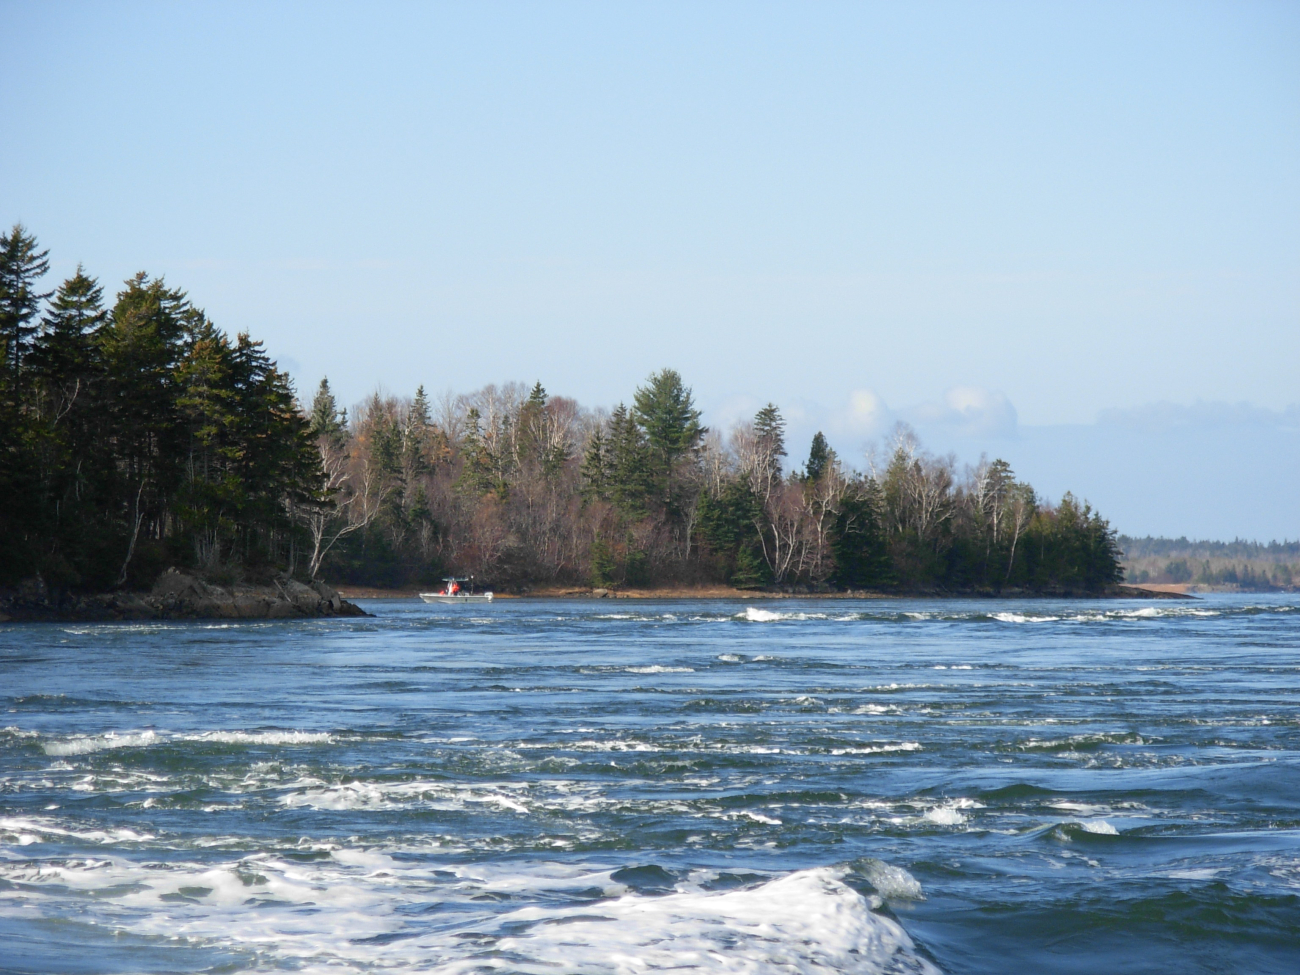 Tidal overfall known as Reversing Falls in Cobscook Bay